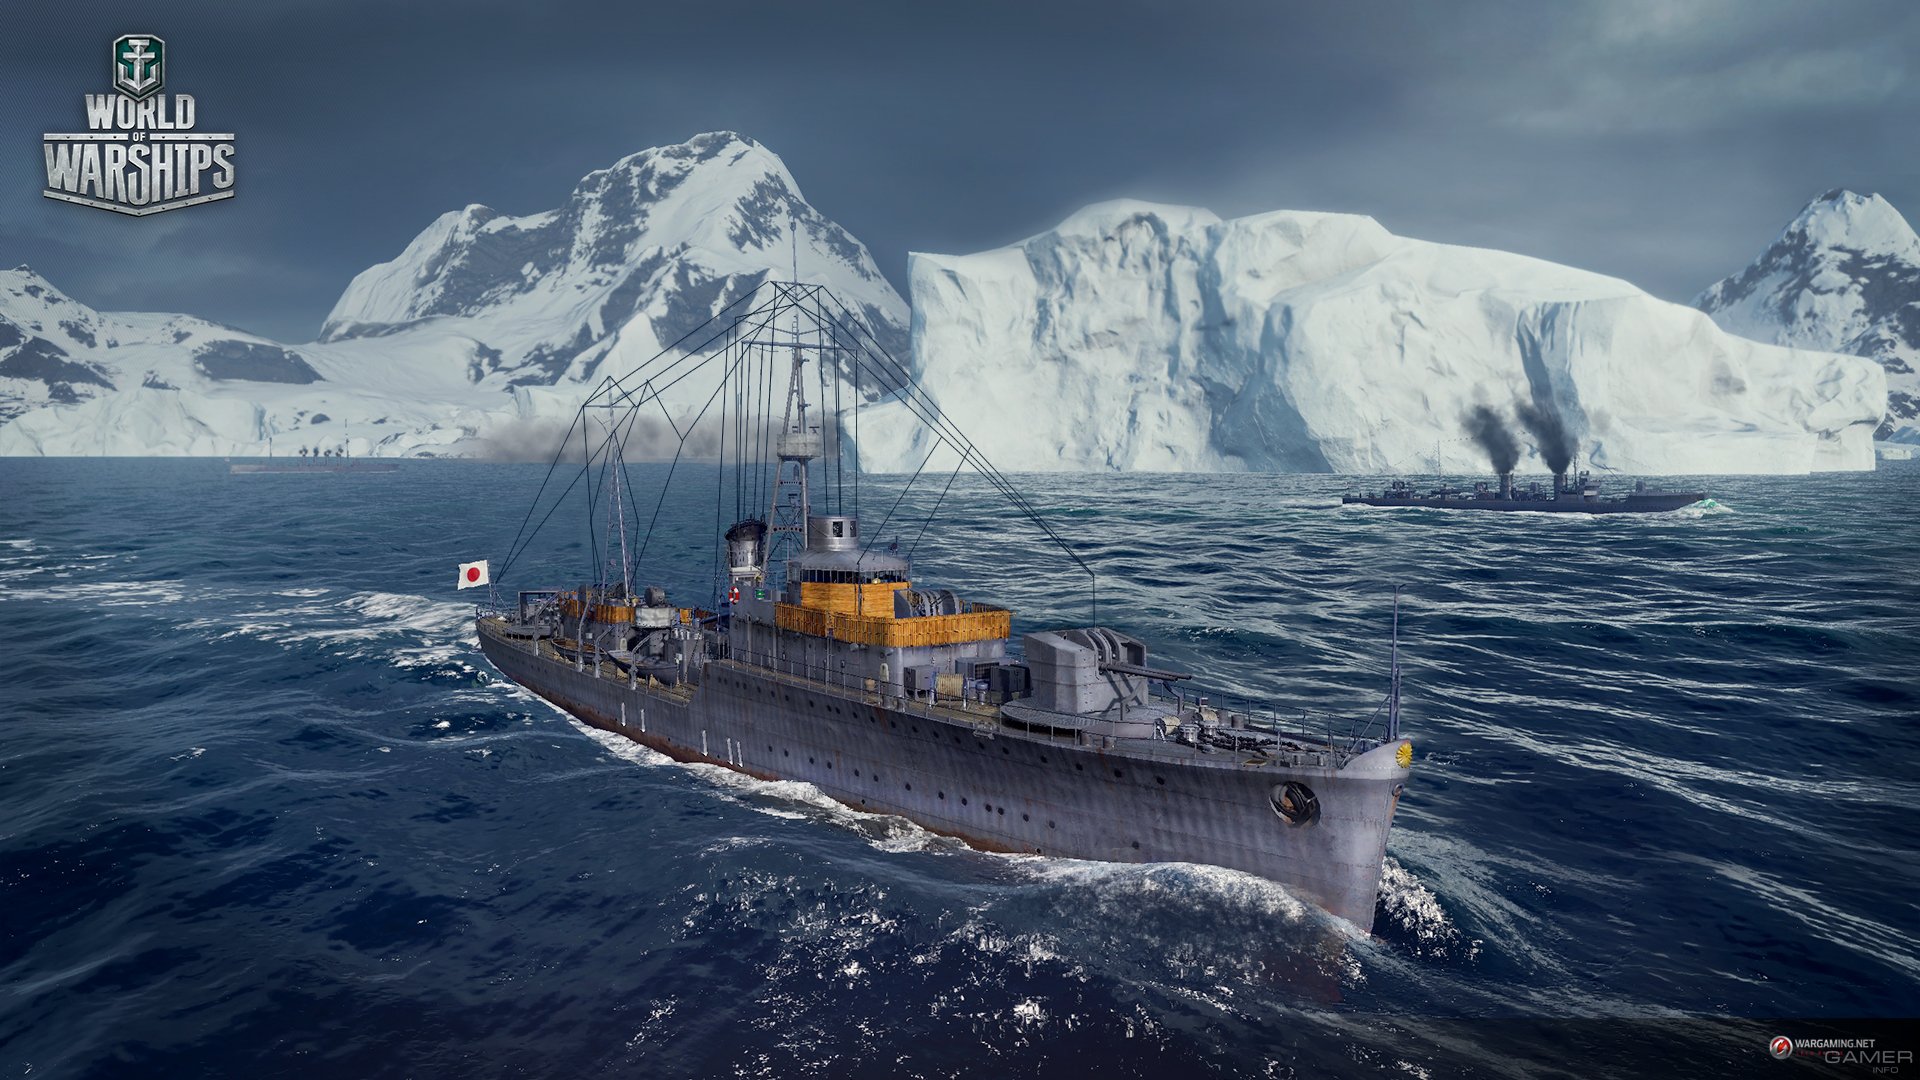 world of warships operating system requirements